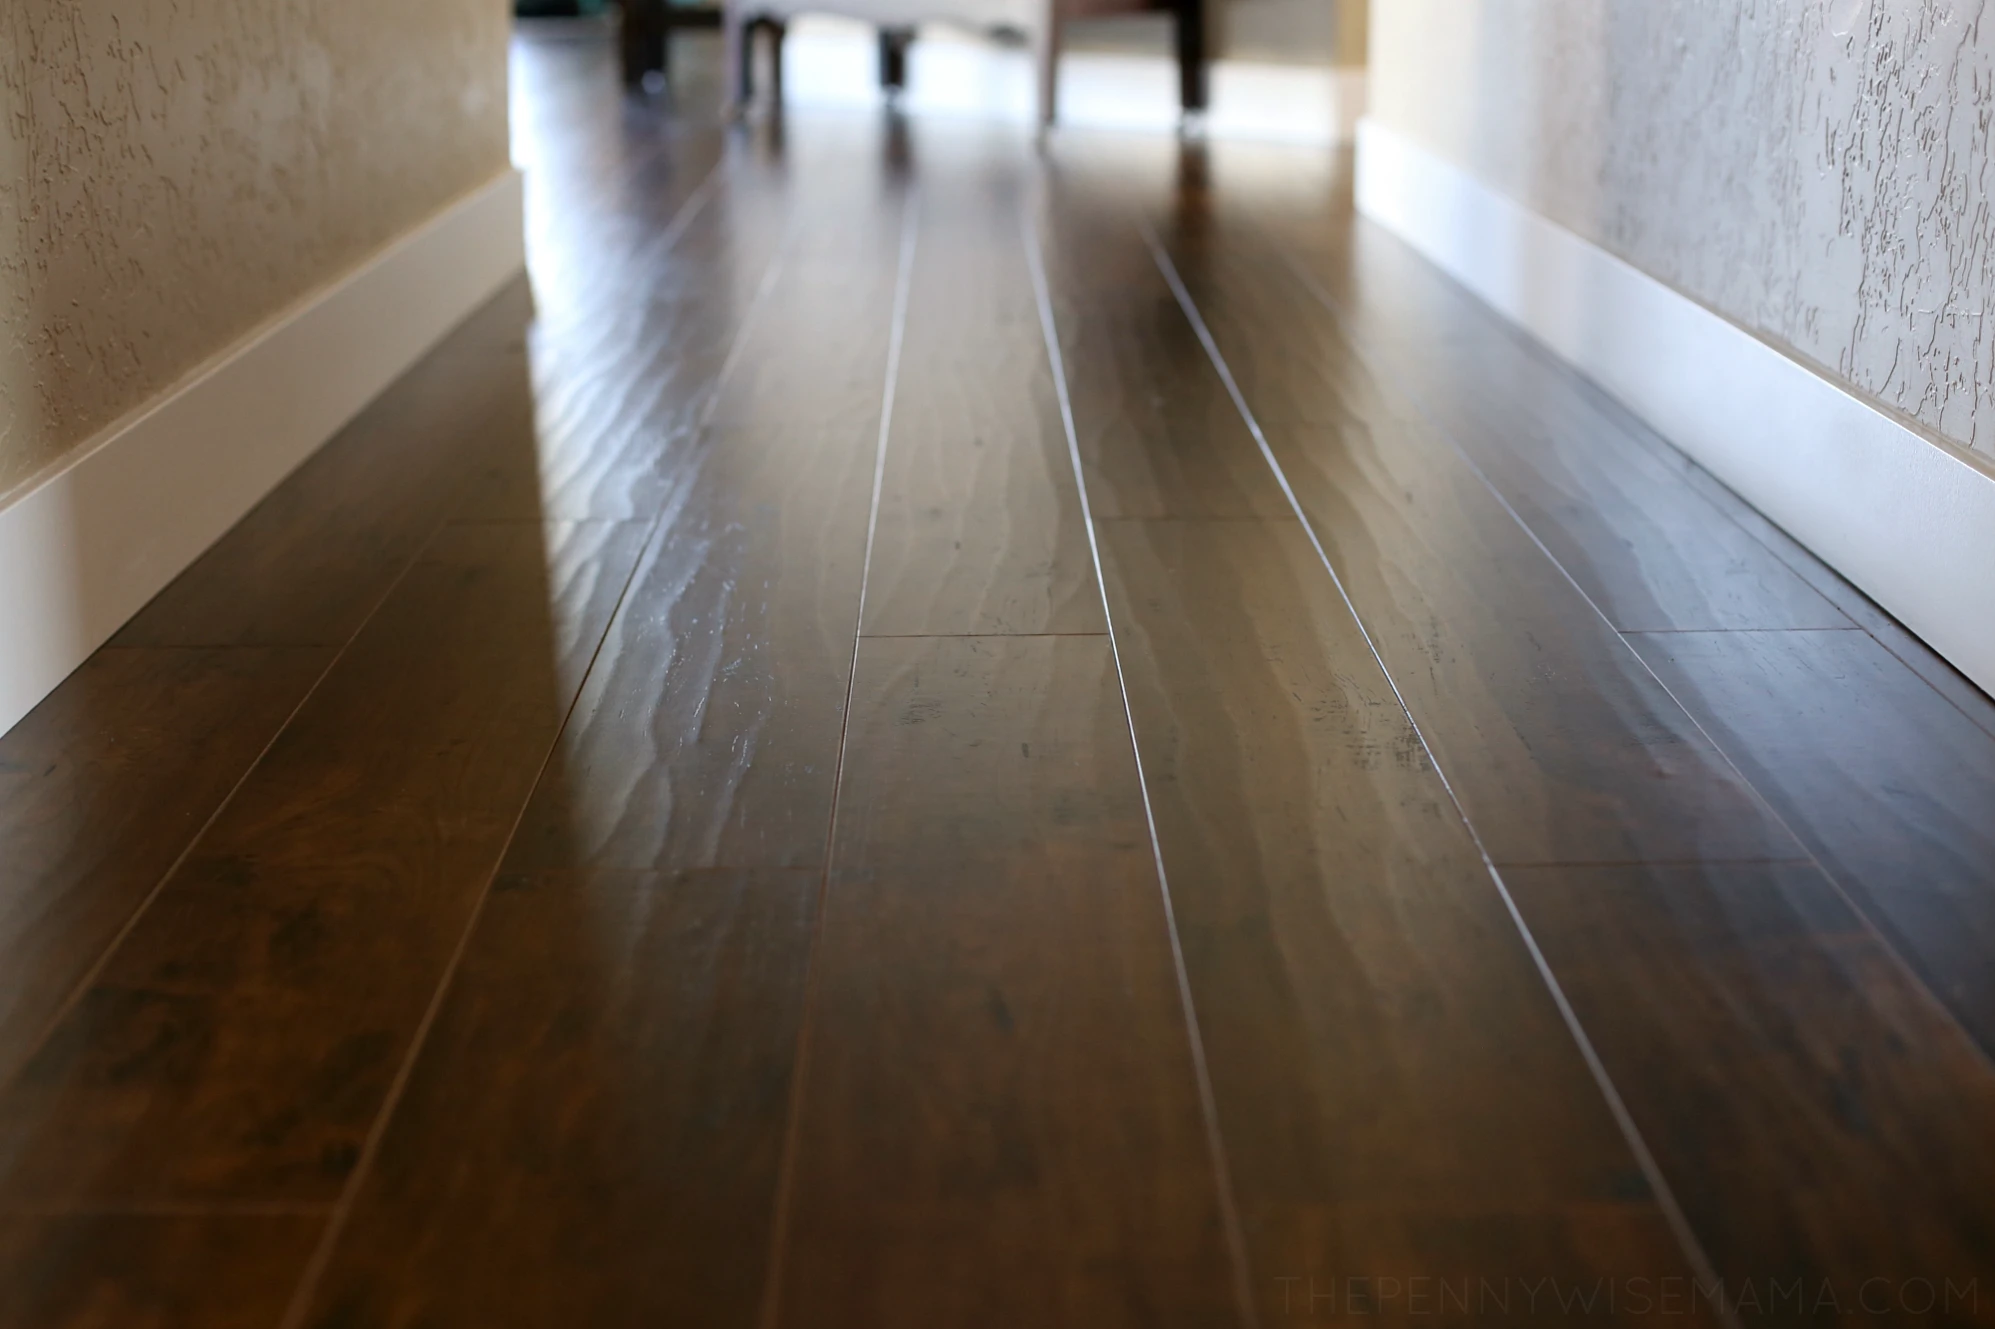 Diy Select Surfaces Laminate Flooring Our Big Reveal The Pennywisemama